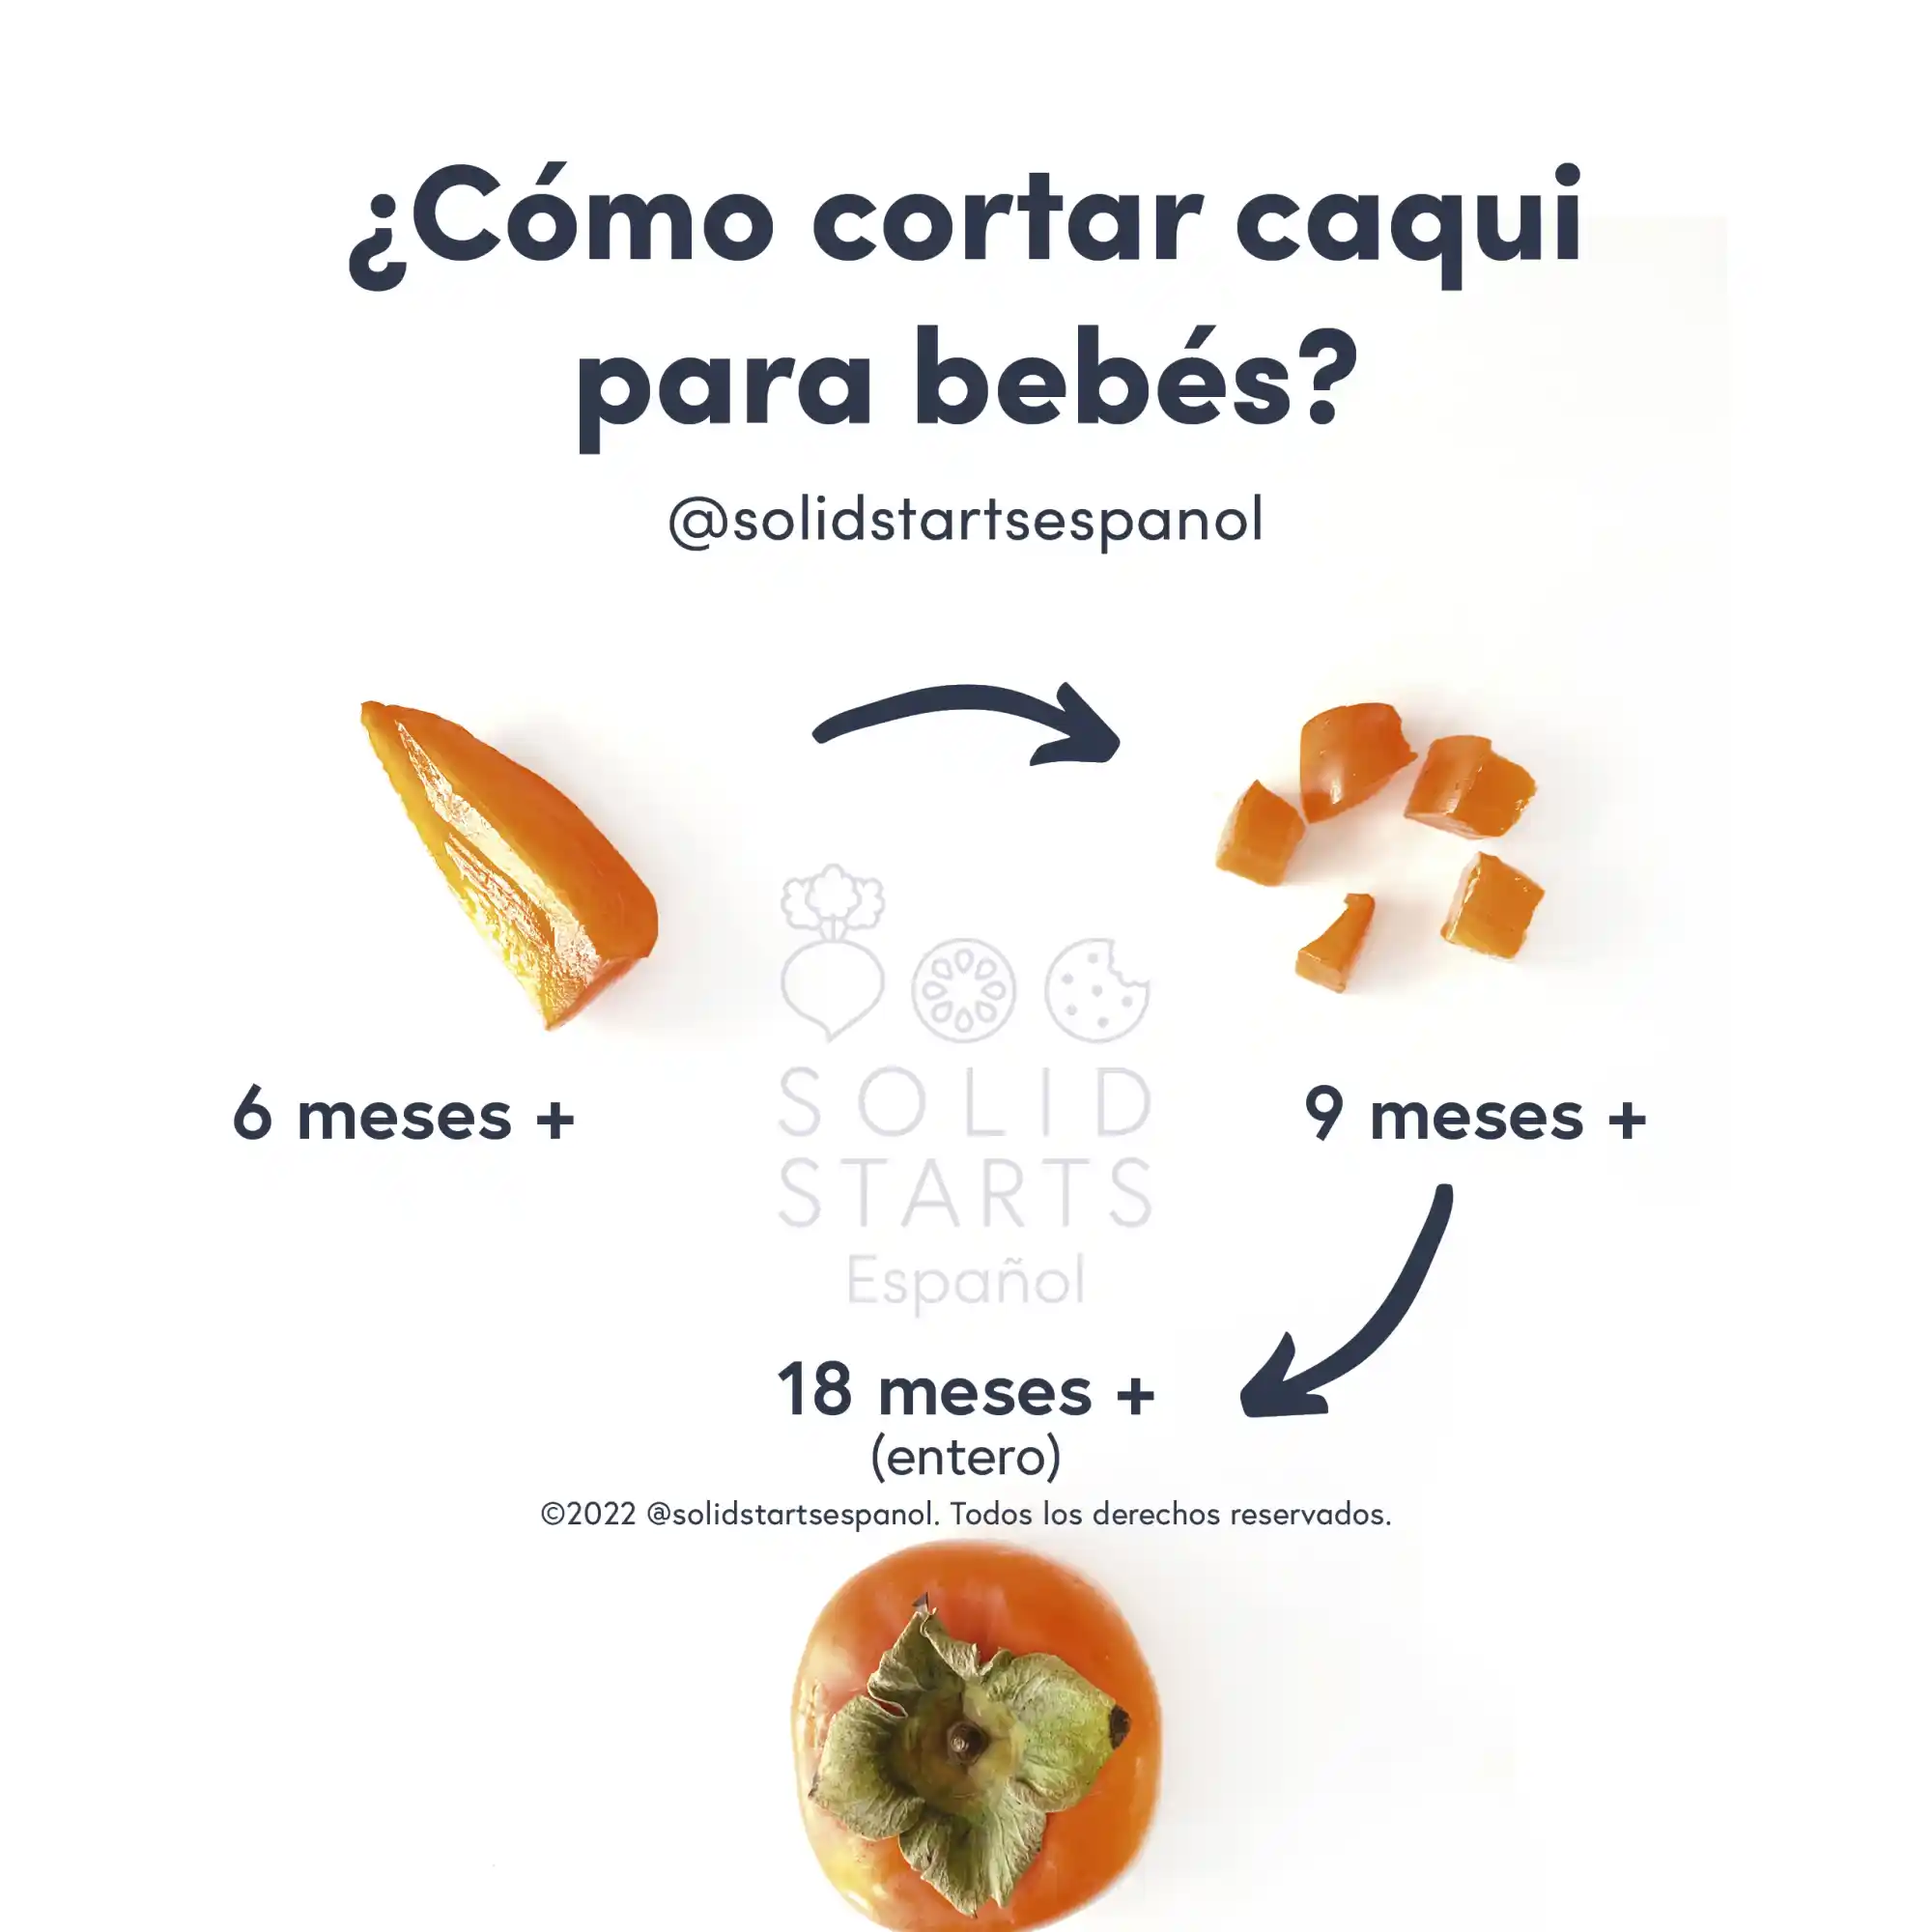 an infographic showing how to serve persimmons to babies: soft wedges at 6 months; bite-sized pieces for 9 months +, and whole soft persimmons for 18 months +